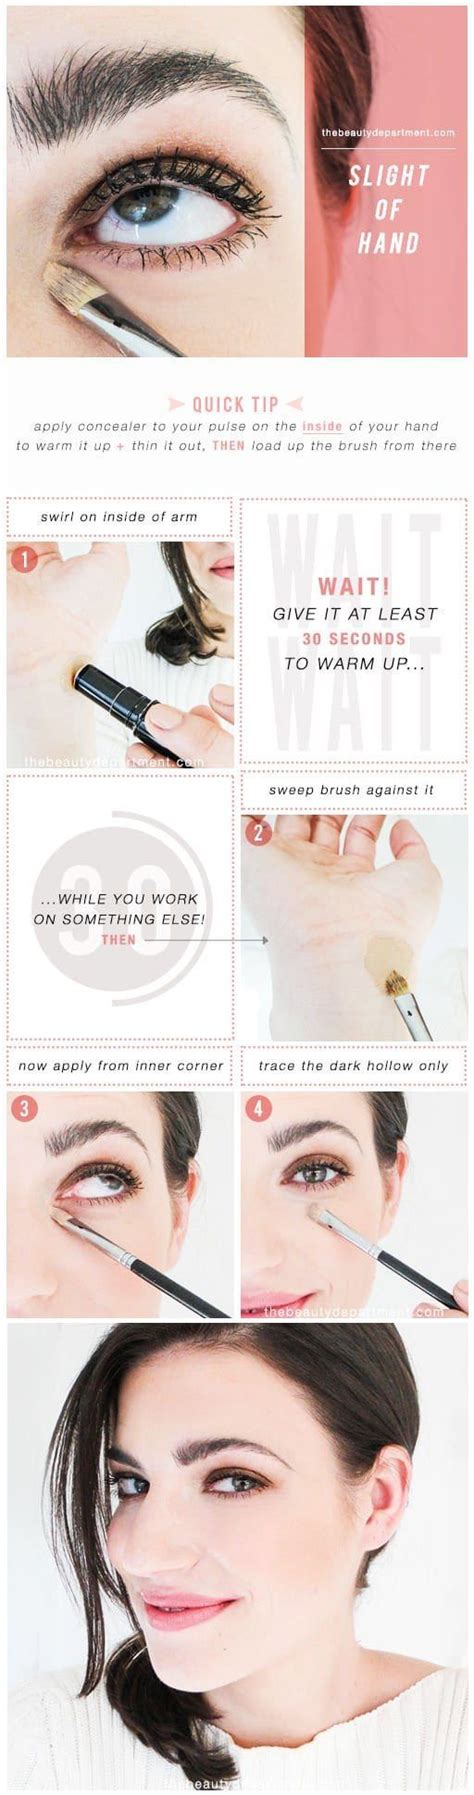 8 Totally Genius Makeup Tips And Hacks Every Woman Should Know The